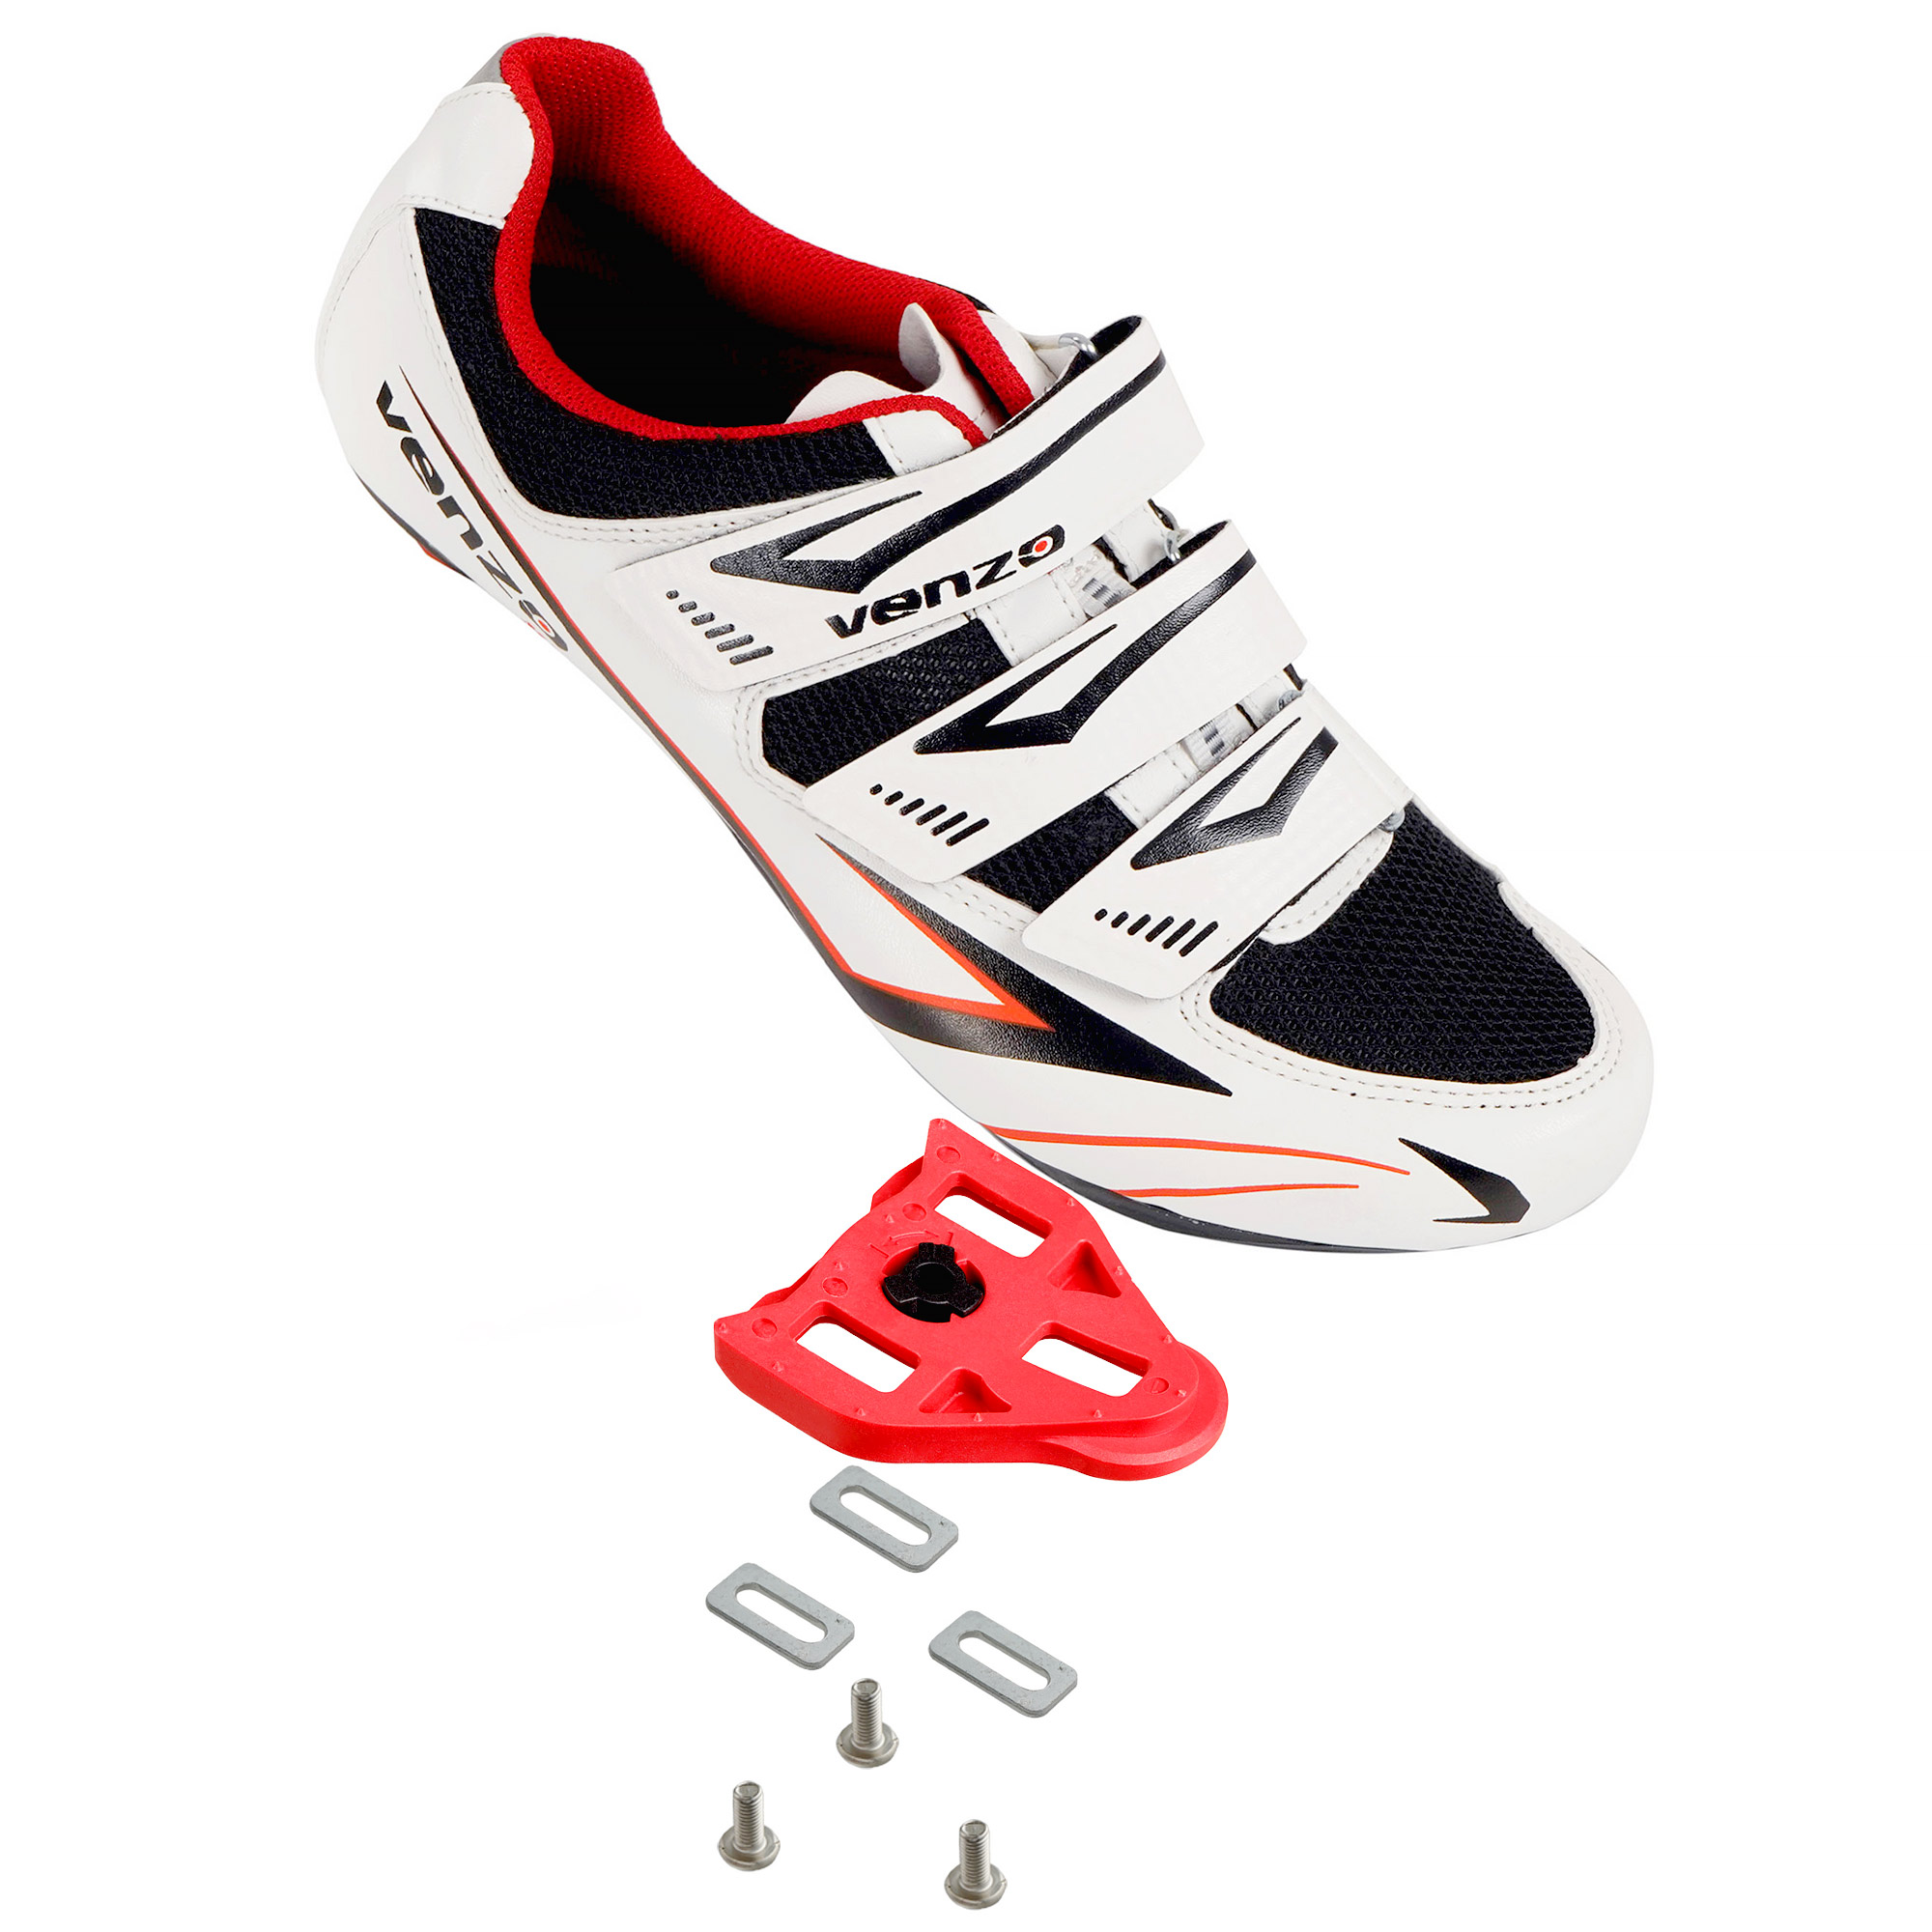 Venzo Bicycle Men's Road Cycling Riding Shoes - 3 Straps- Compatible with Peloton Shimano SPD & Look ARC Delta - Perfect for Road Racing Bikes White